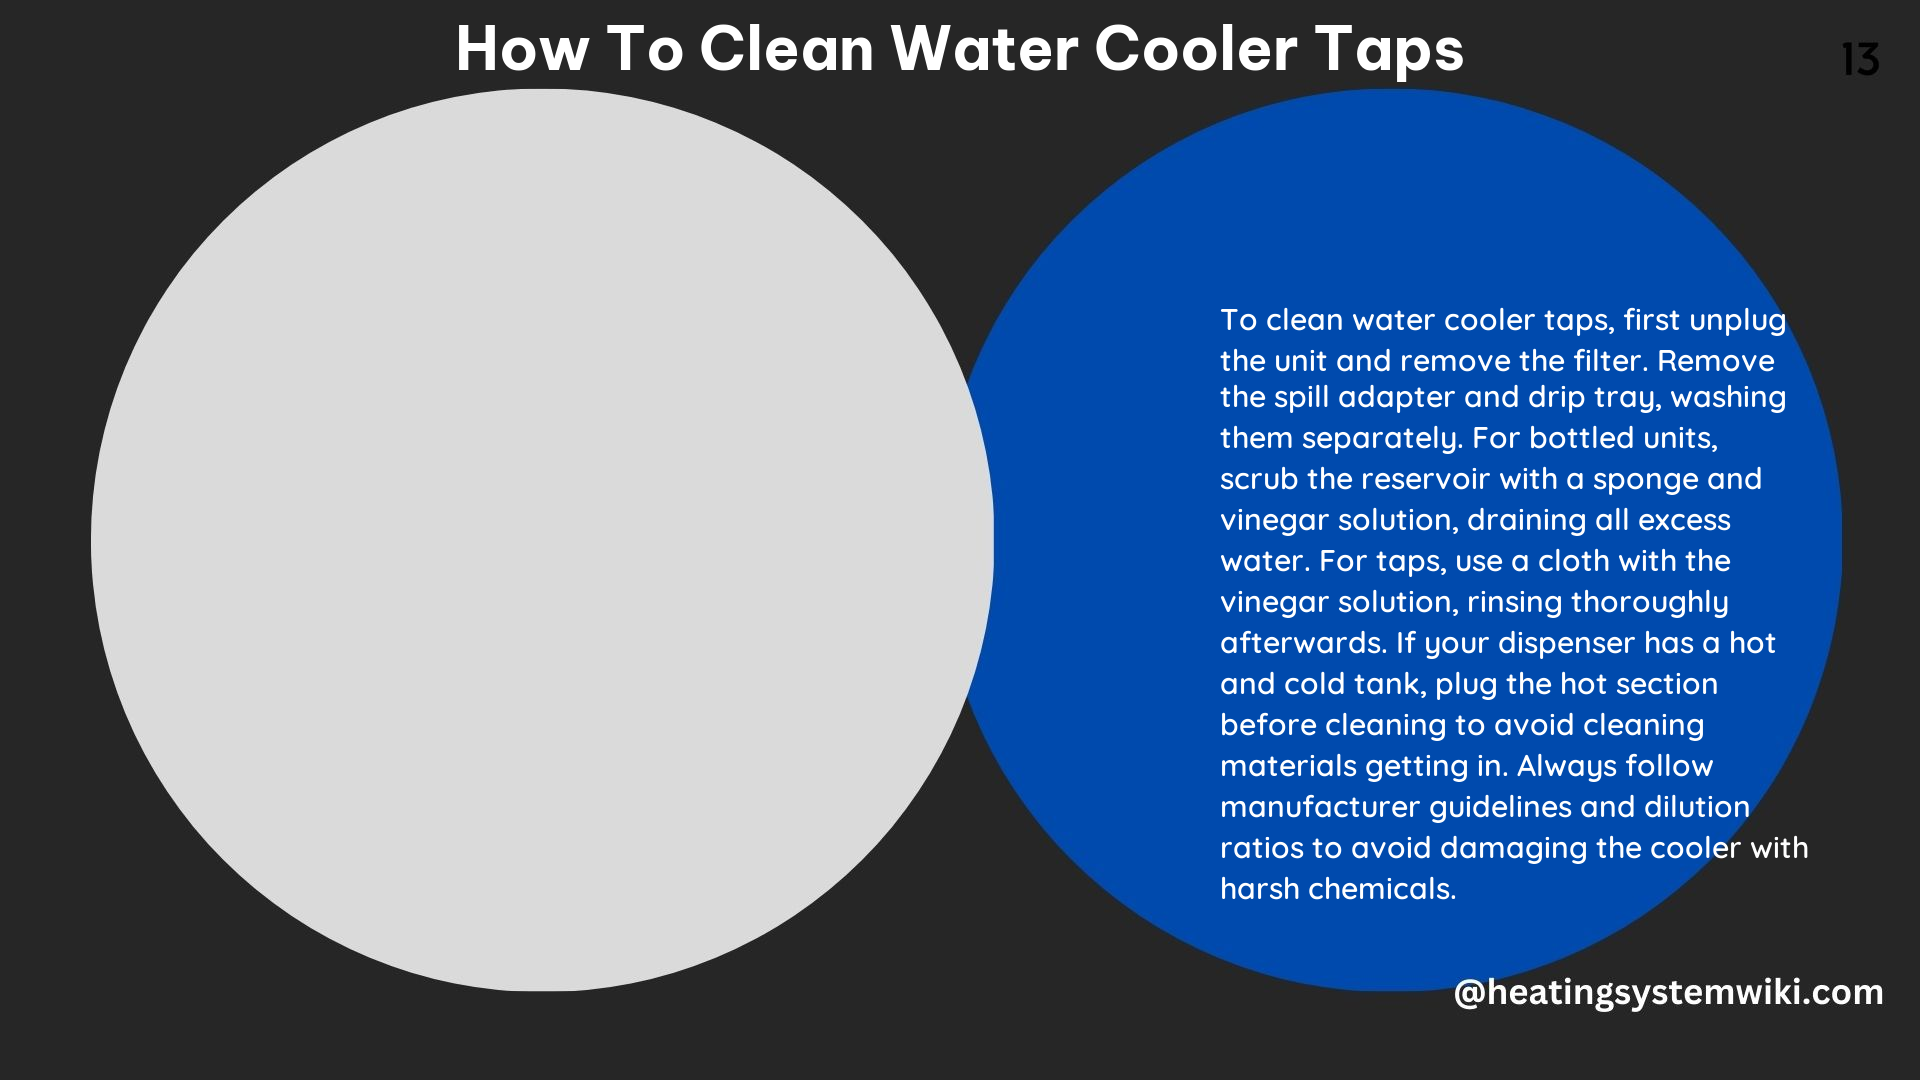 How to Clean Water Cooler Taps